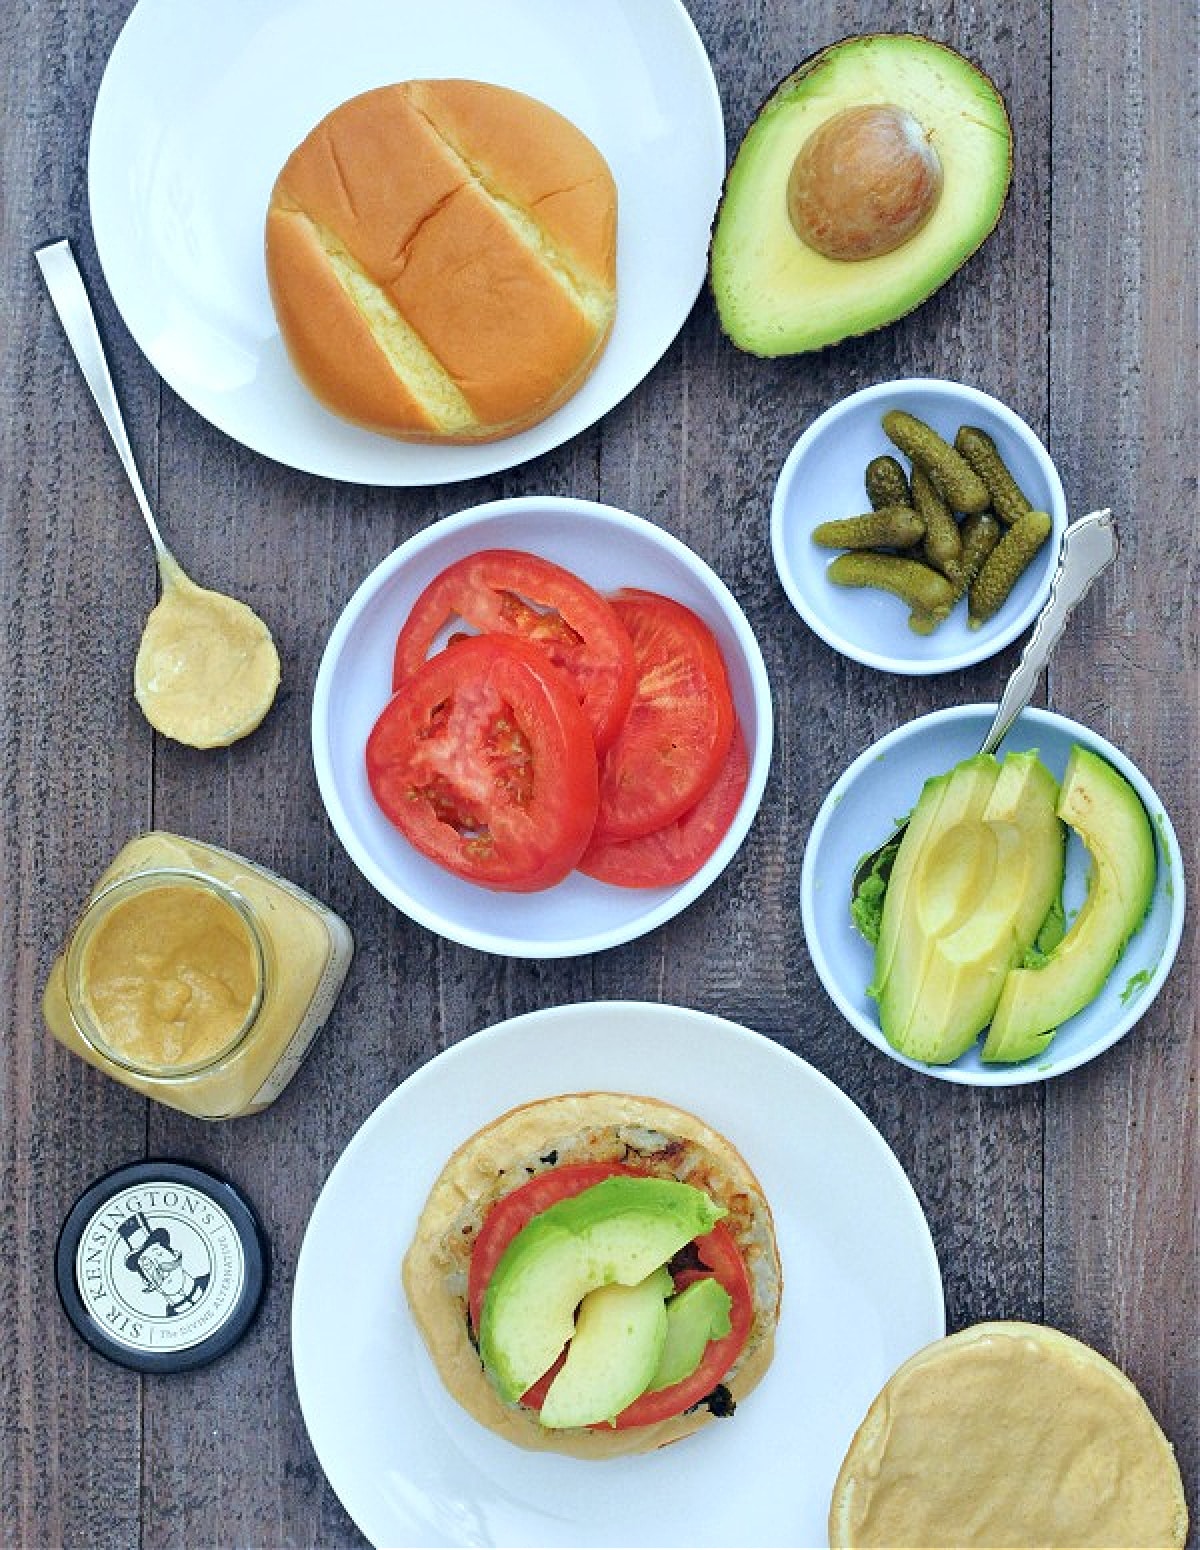 Overhead view of a burger on a bottom bun, sitting on a white plate. Burger is dressed with a tomato slice and three slices of avocado. Next to this plate, there is an open jar of mustard and a mustard covered spoon, a half avocado and a small plate of avocado slices, a small plate of tomato slices and another plate with gherkin pickles.